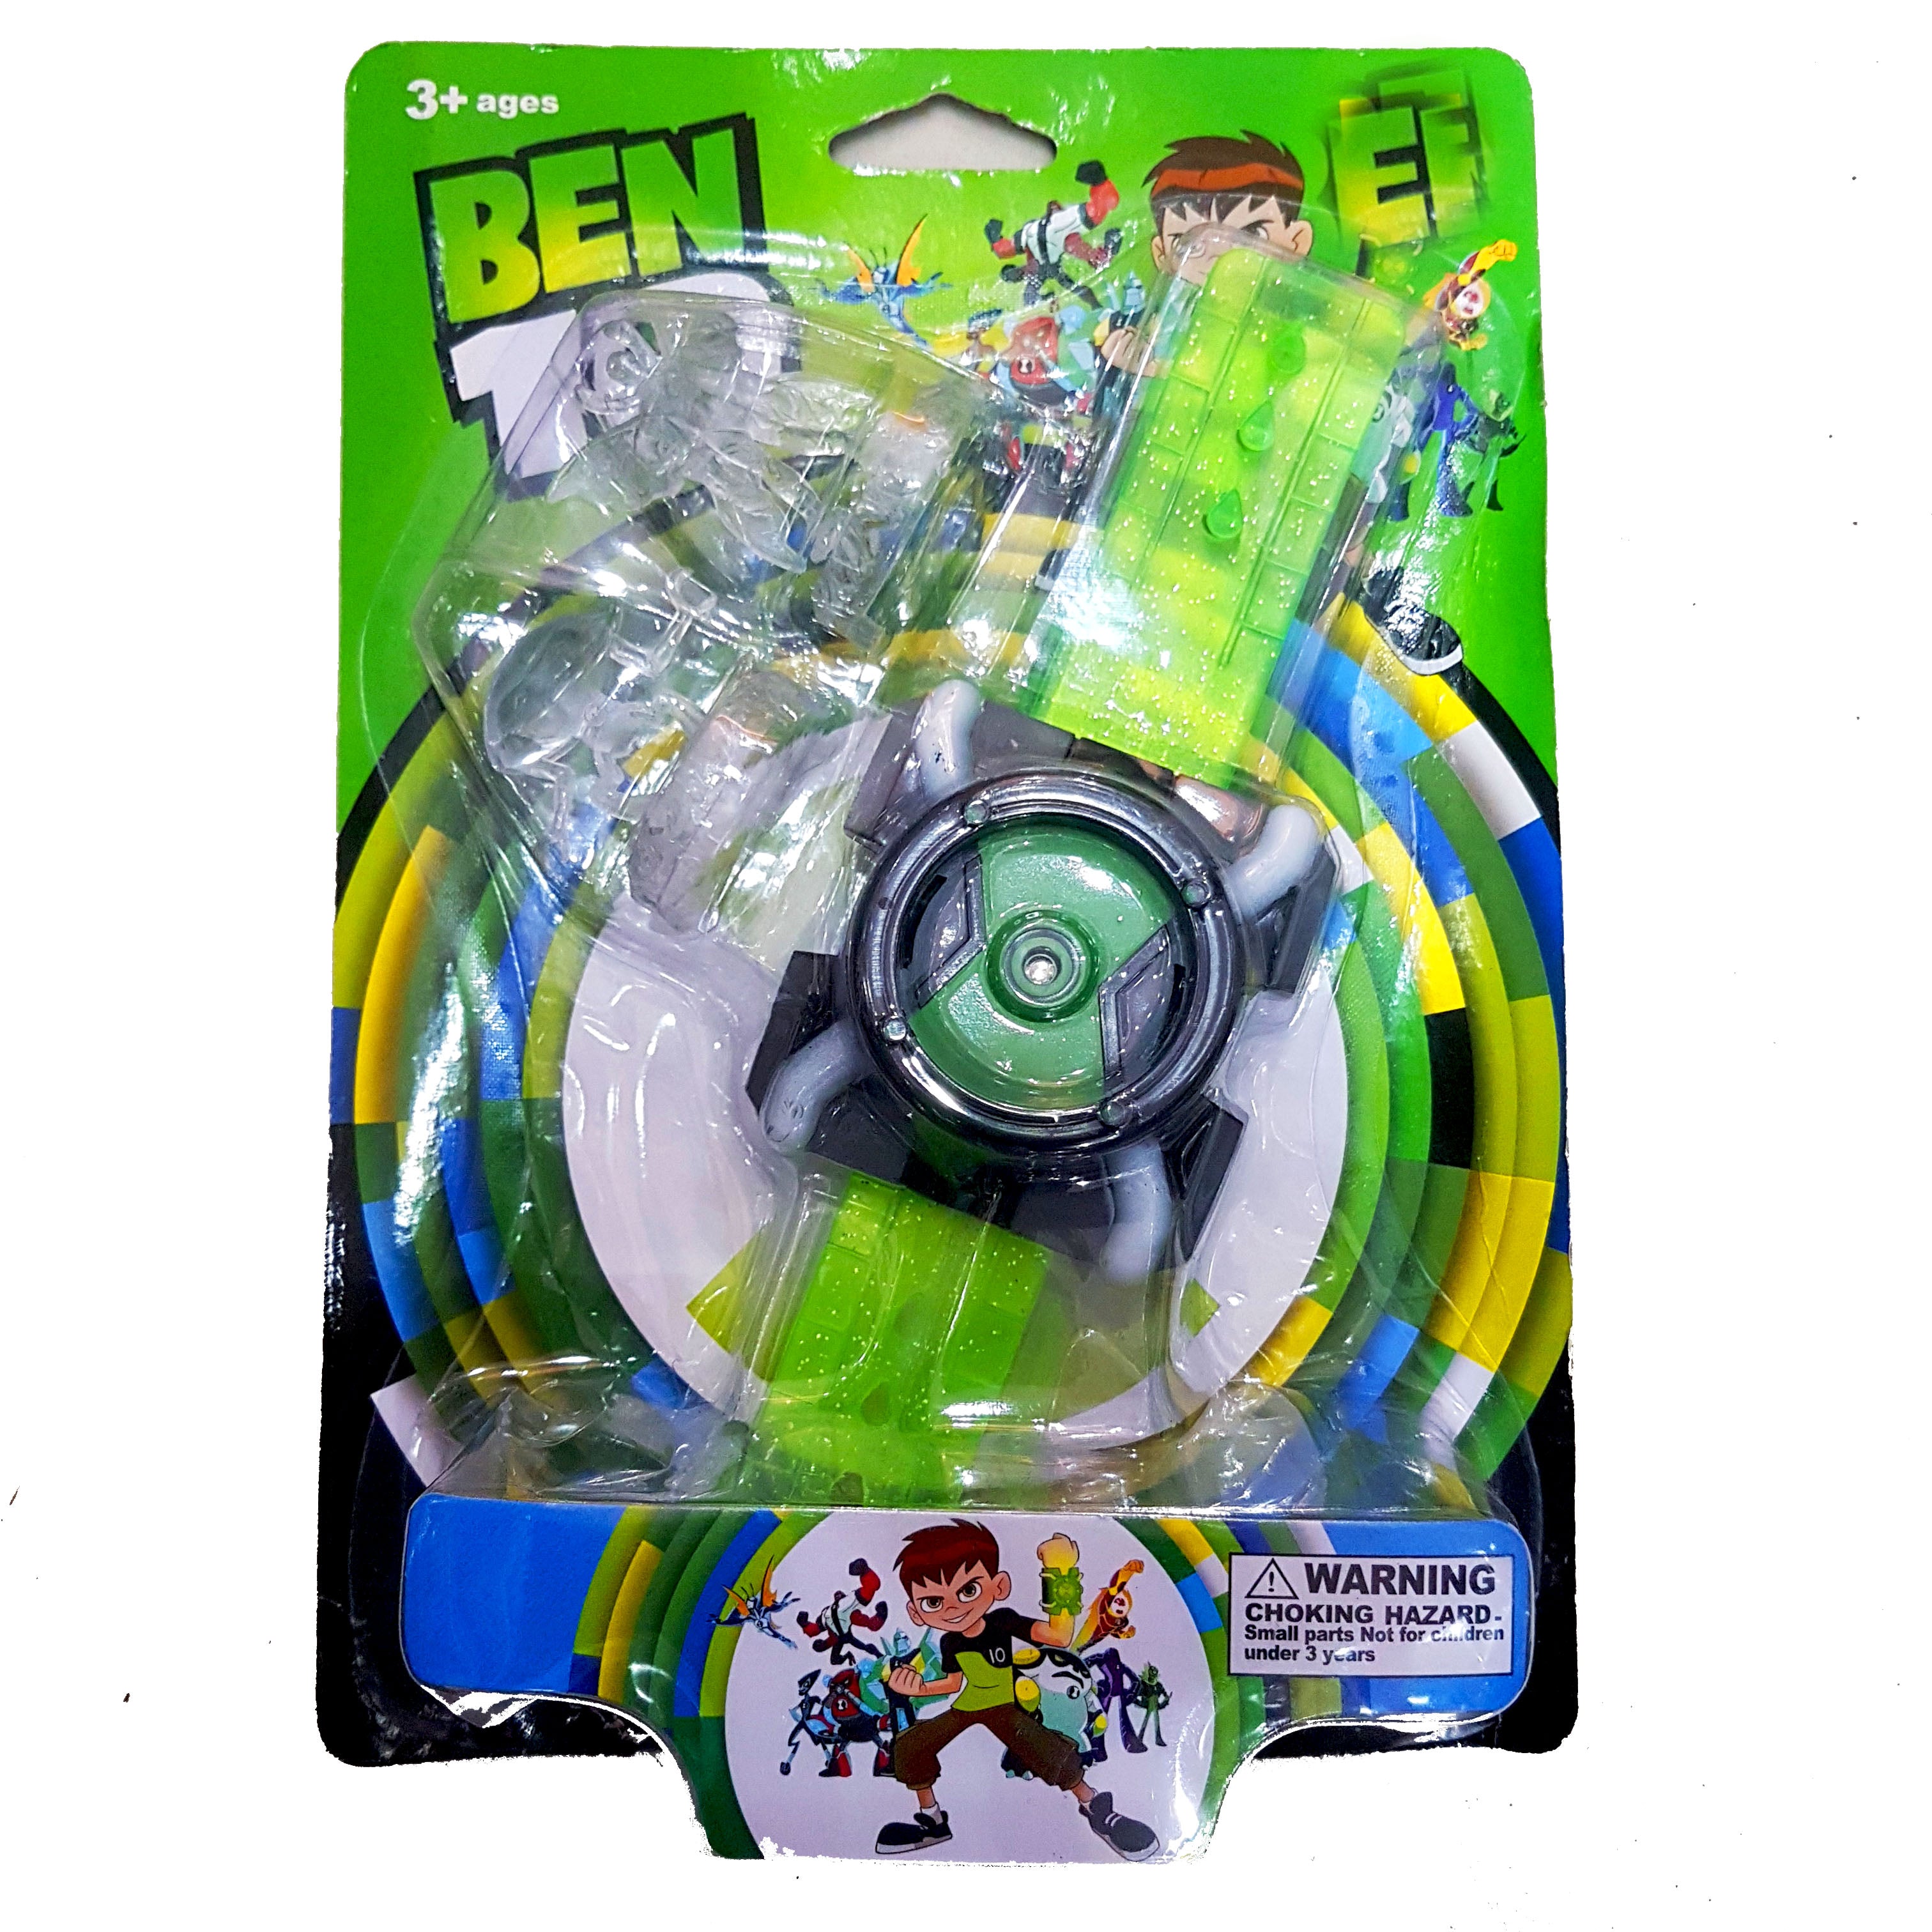 Ben 10 Ultimate Alien Watch with 2 Exclusive Action Figures - Perfect Gift for Boys Aged 3+